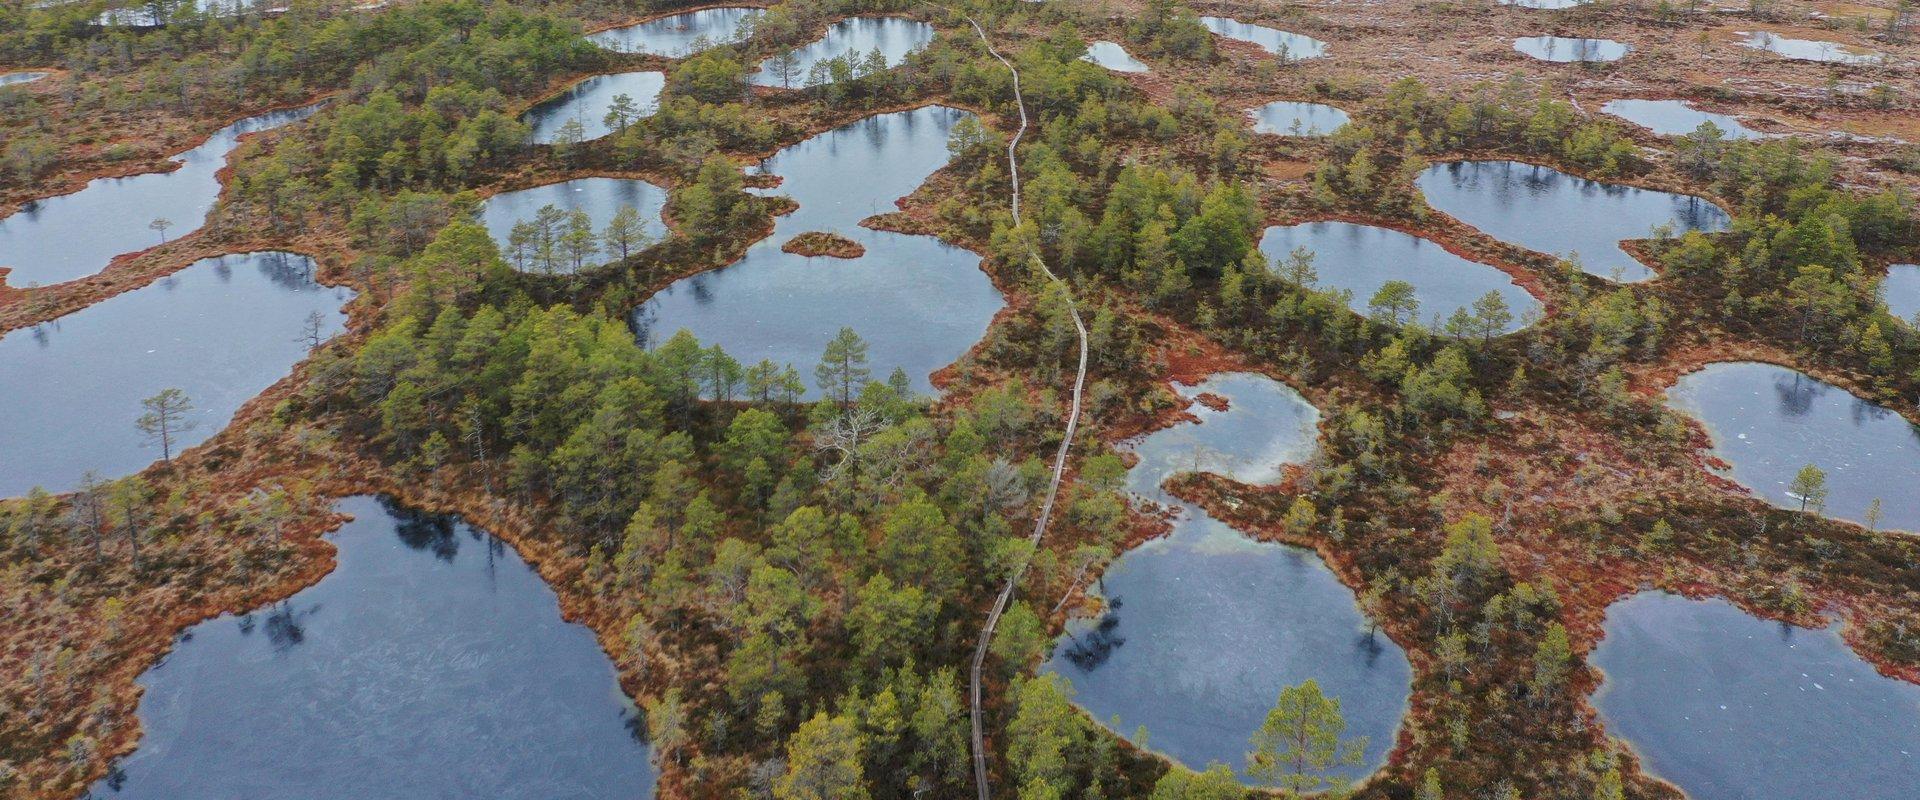 Walking in a bog with snowshoes creates an unearthly feeling – you are basically walking on water. Kõnnu Suursoo bog and the surrounding eskers have f